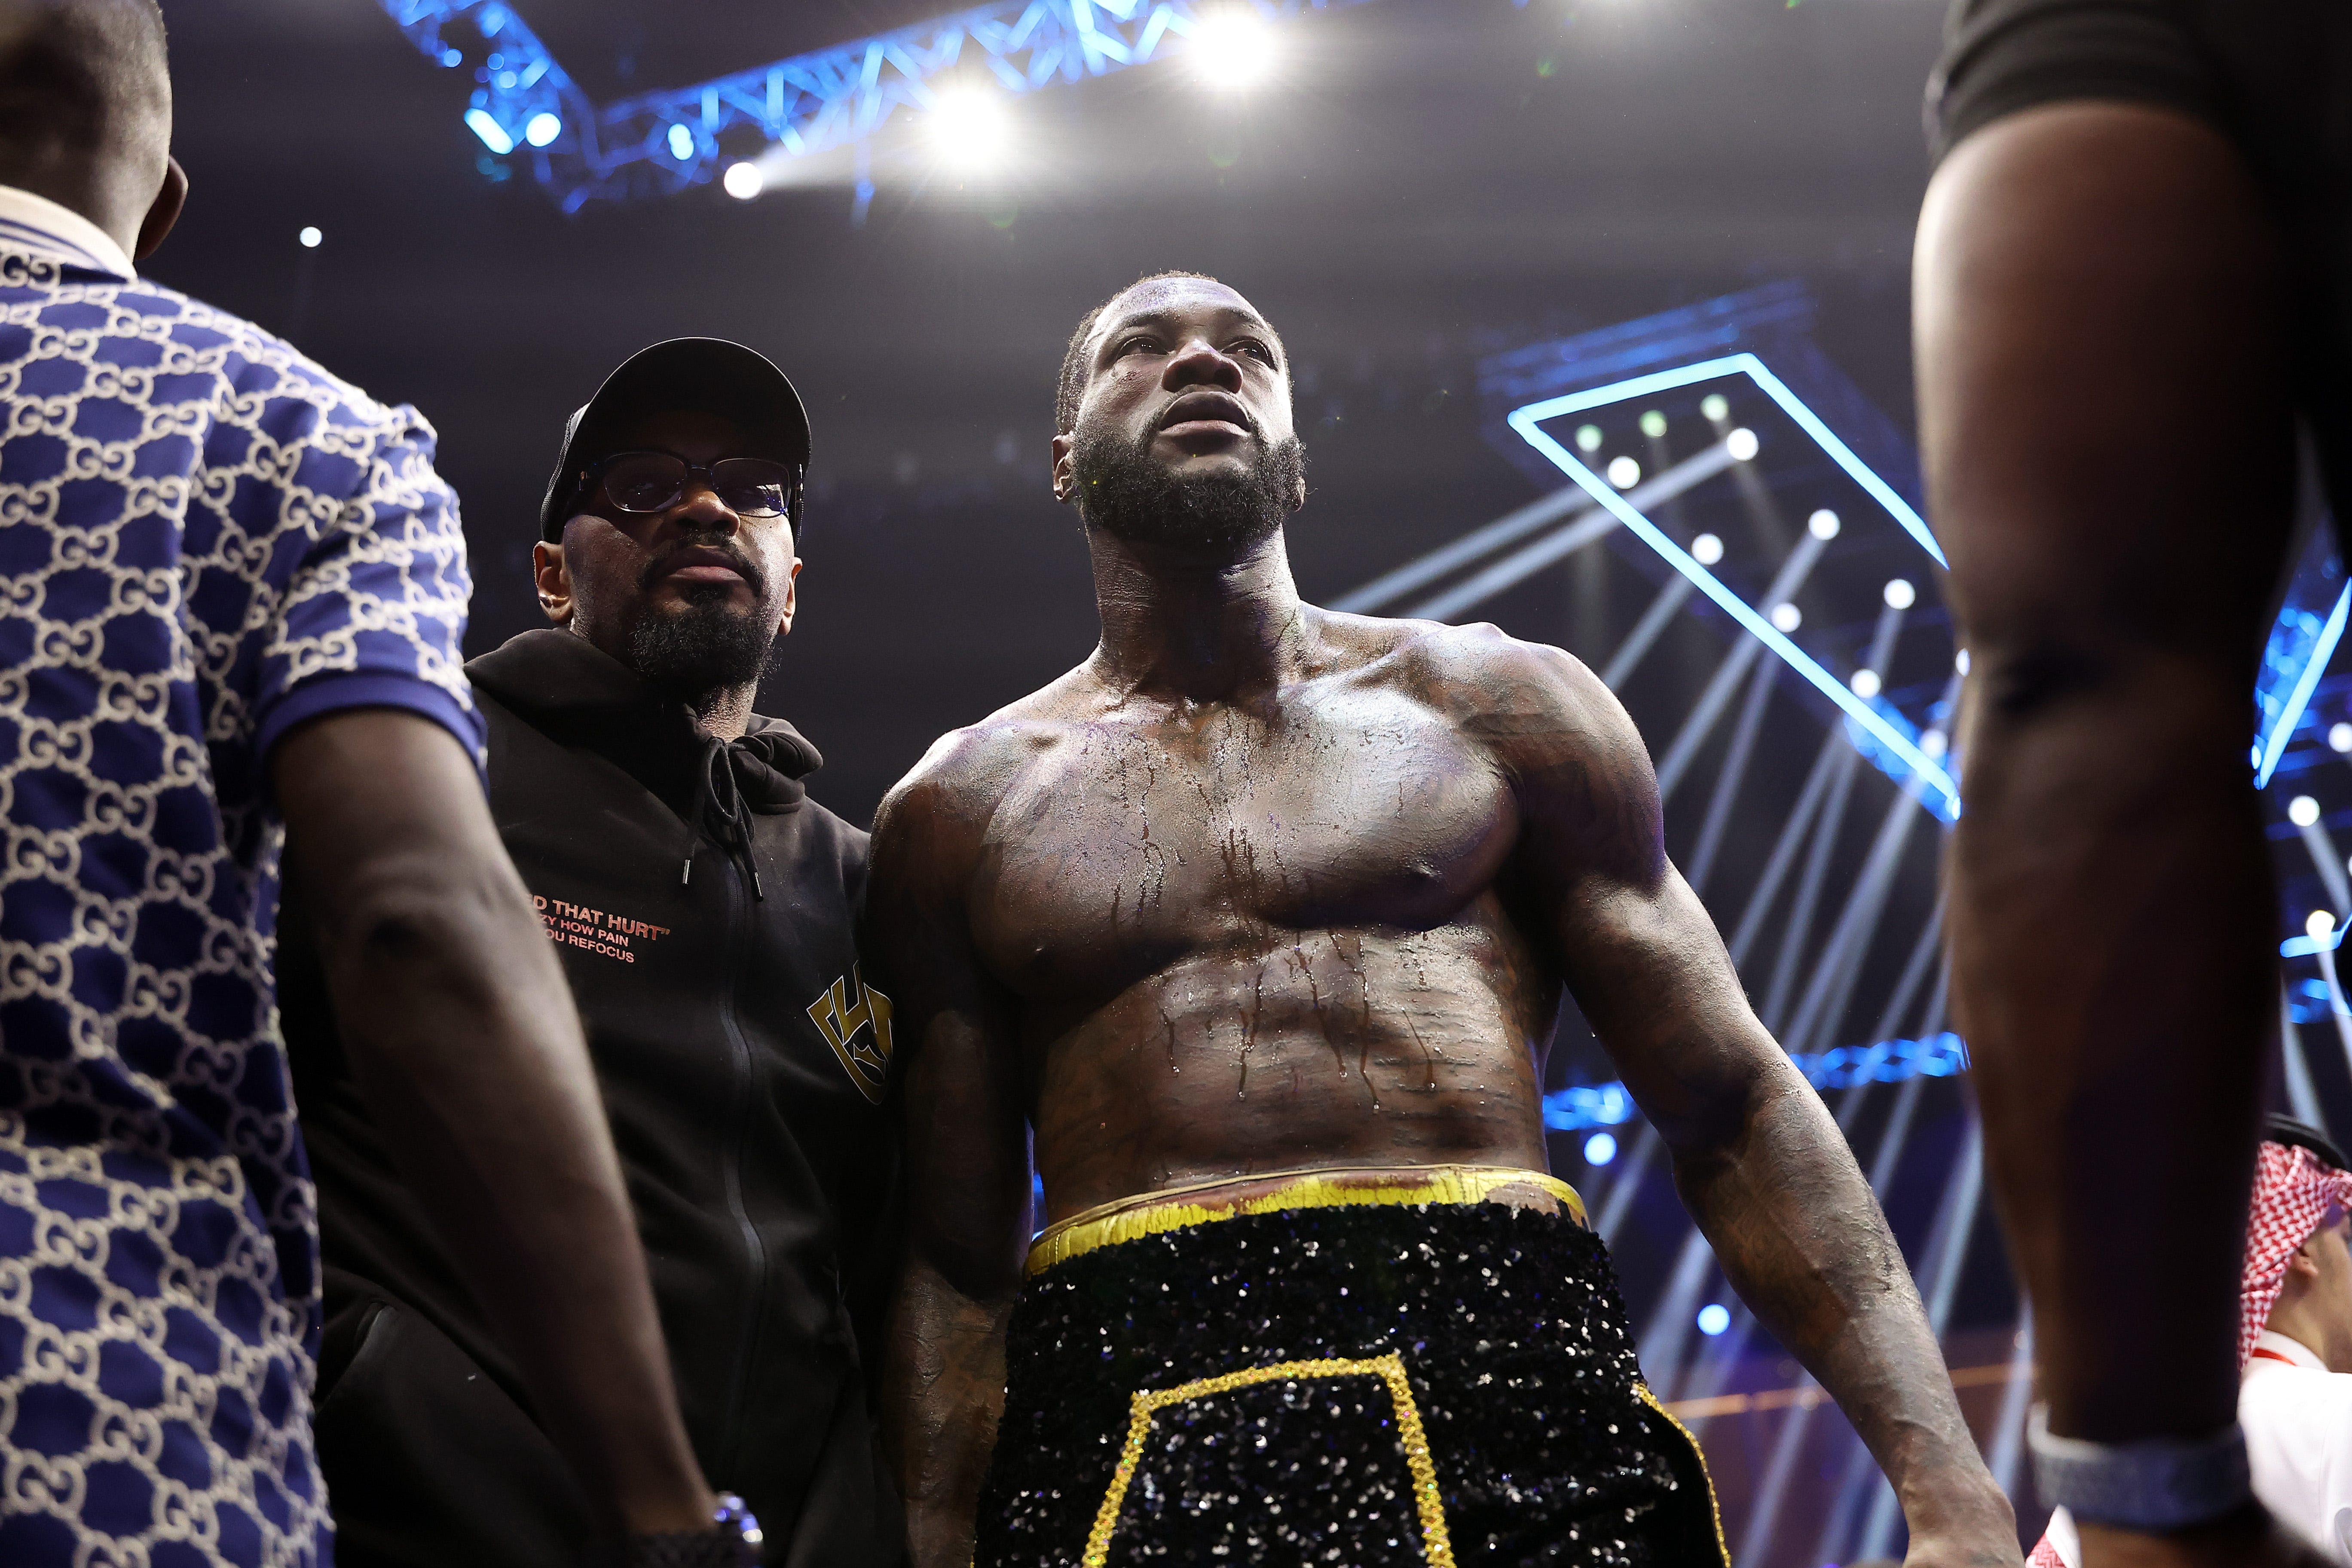 Deontay Wilder's dad wants trainer fired after loss to Zilhei Zhang adds to boxer's struggles